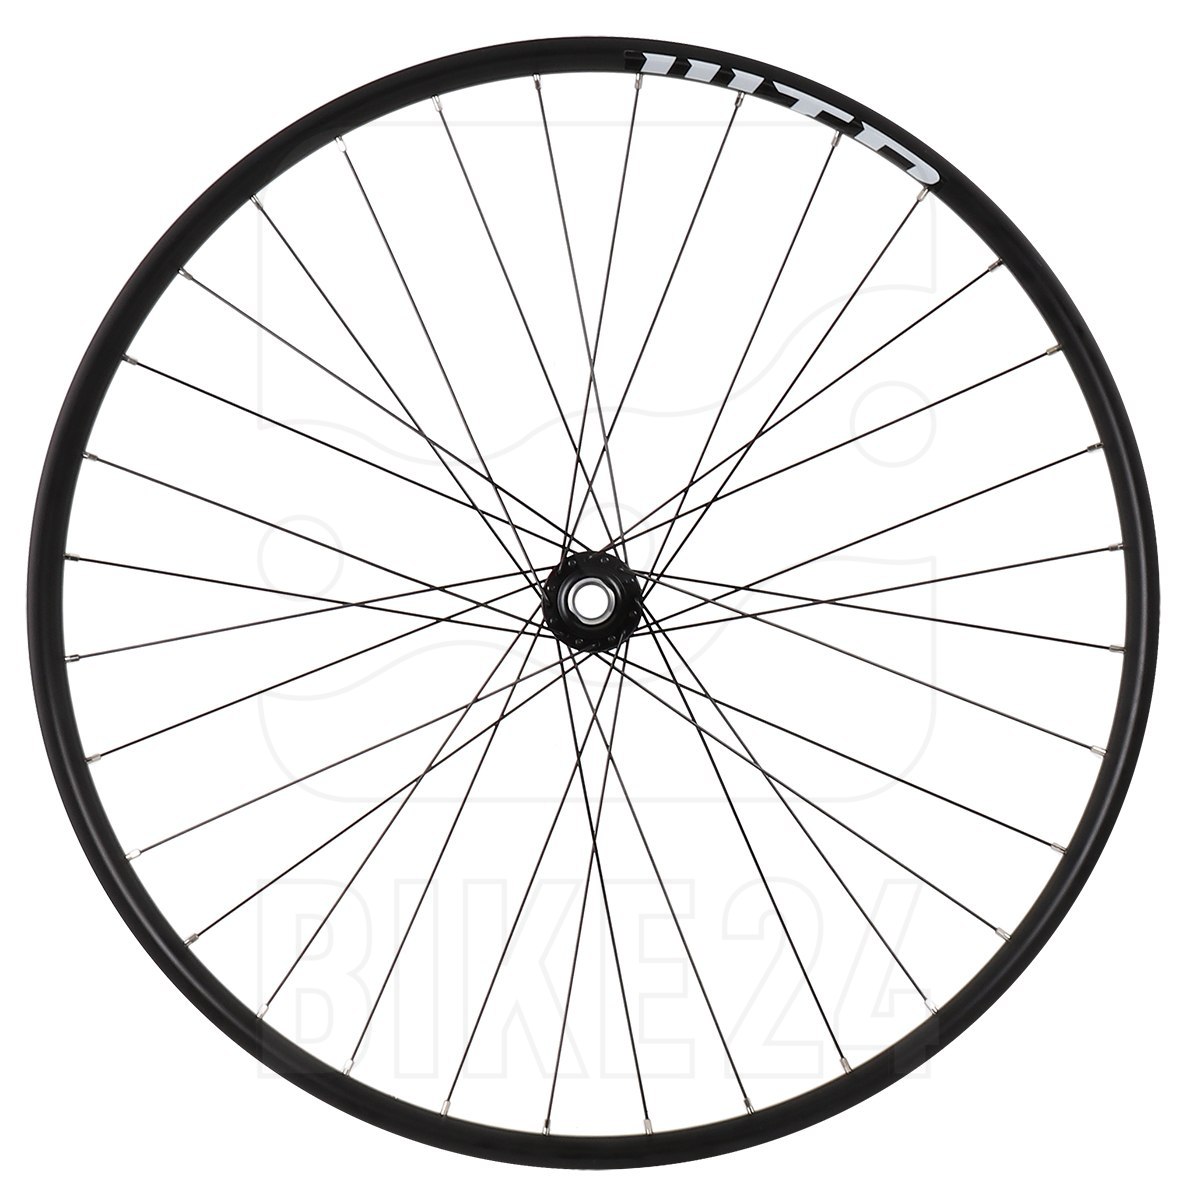 Picture of Shimano | WTB - Deore XT HB-M8010 | ST i25 - 27.5 Inch Front Wheel - Centerlock - 15x100mm